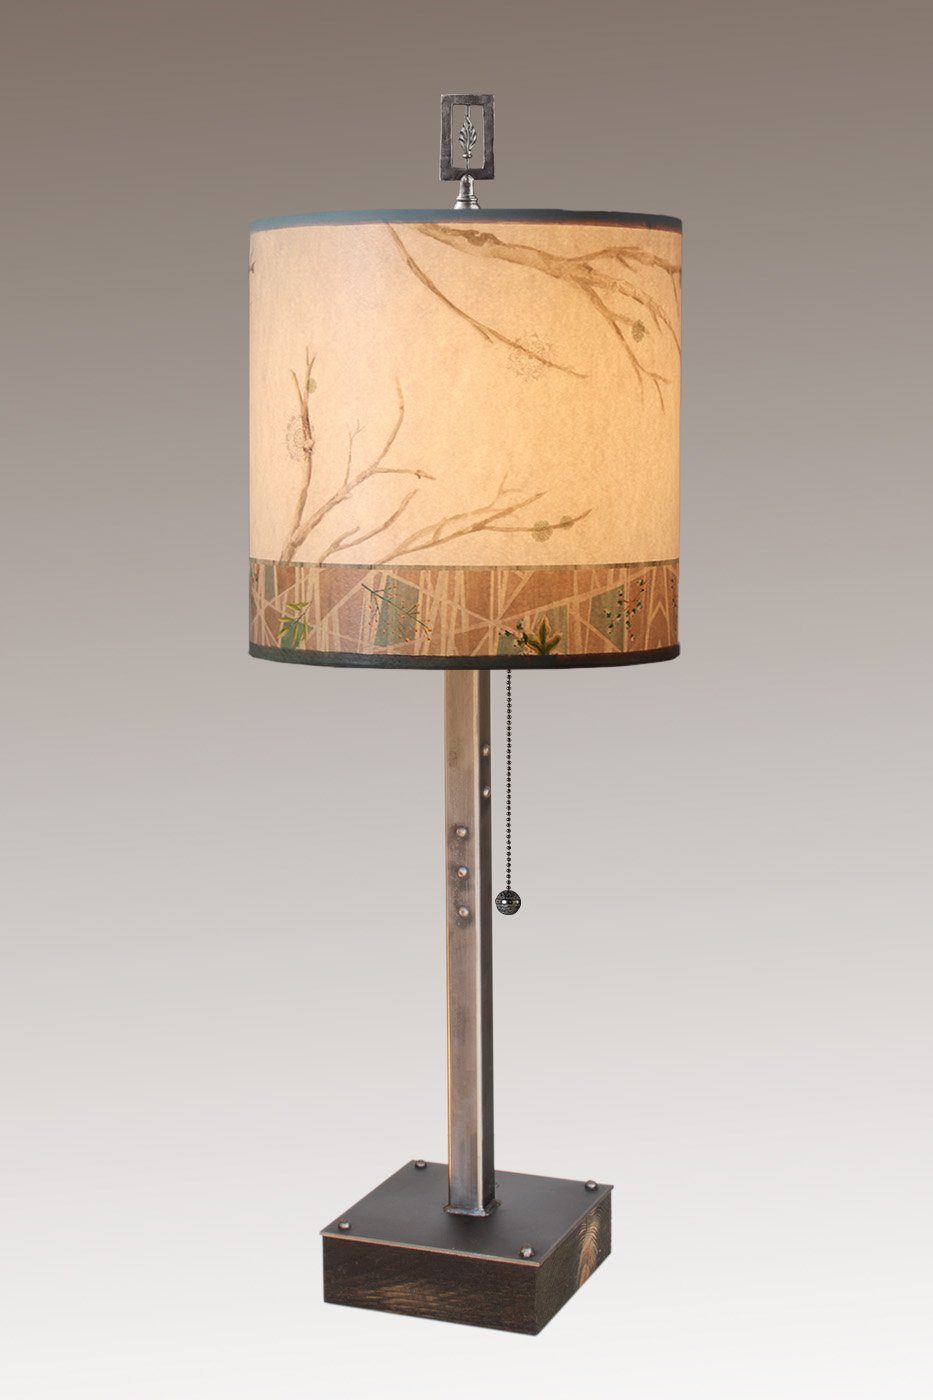 Janna Ugone & Co Table Lamps Steel Table Lamp on Wood with Medium Drum Shade in Prism Branch